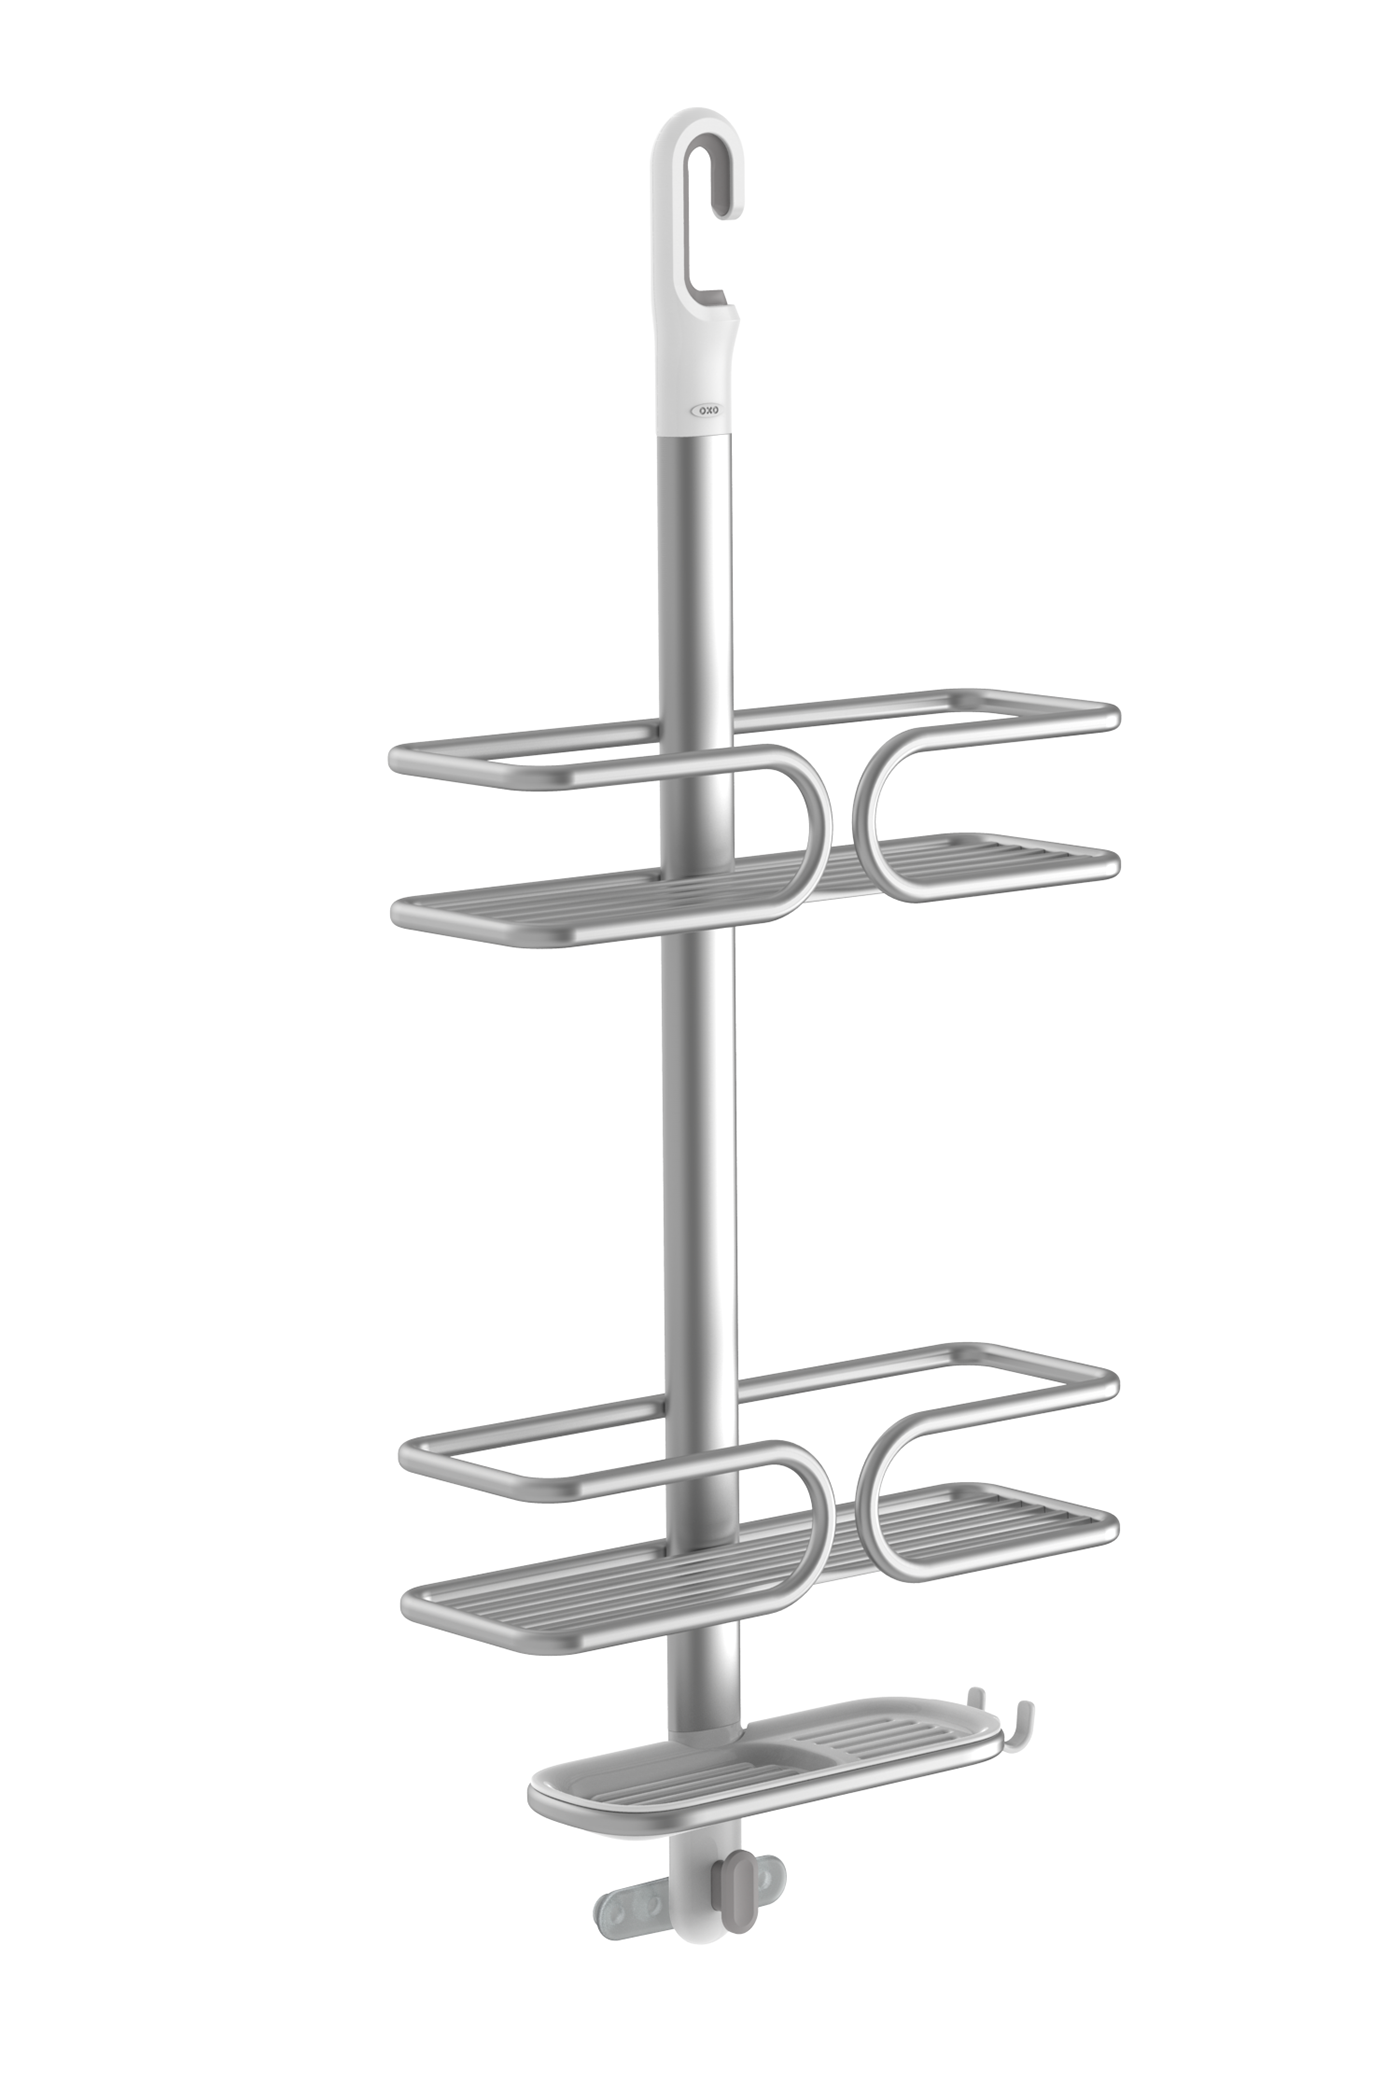 product design  industrial design  oxo SHOWER storage ID